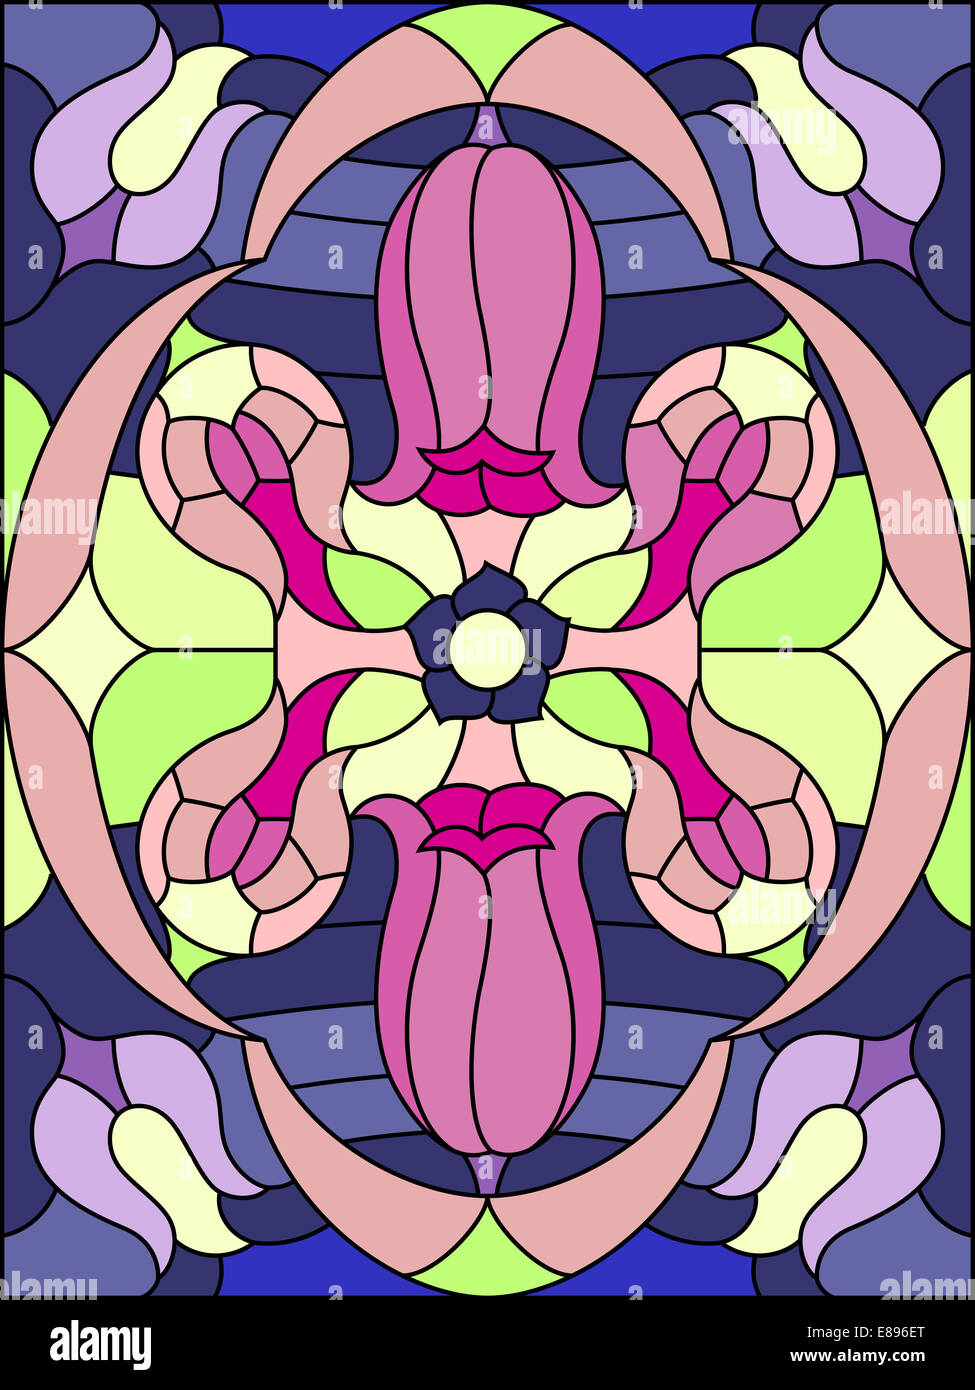 Flowers composition. Floral pattern for stained glass window. Stock Photo